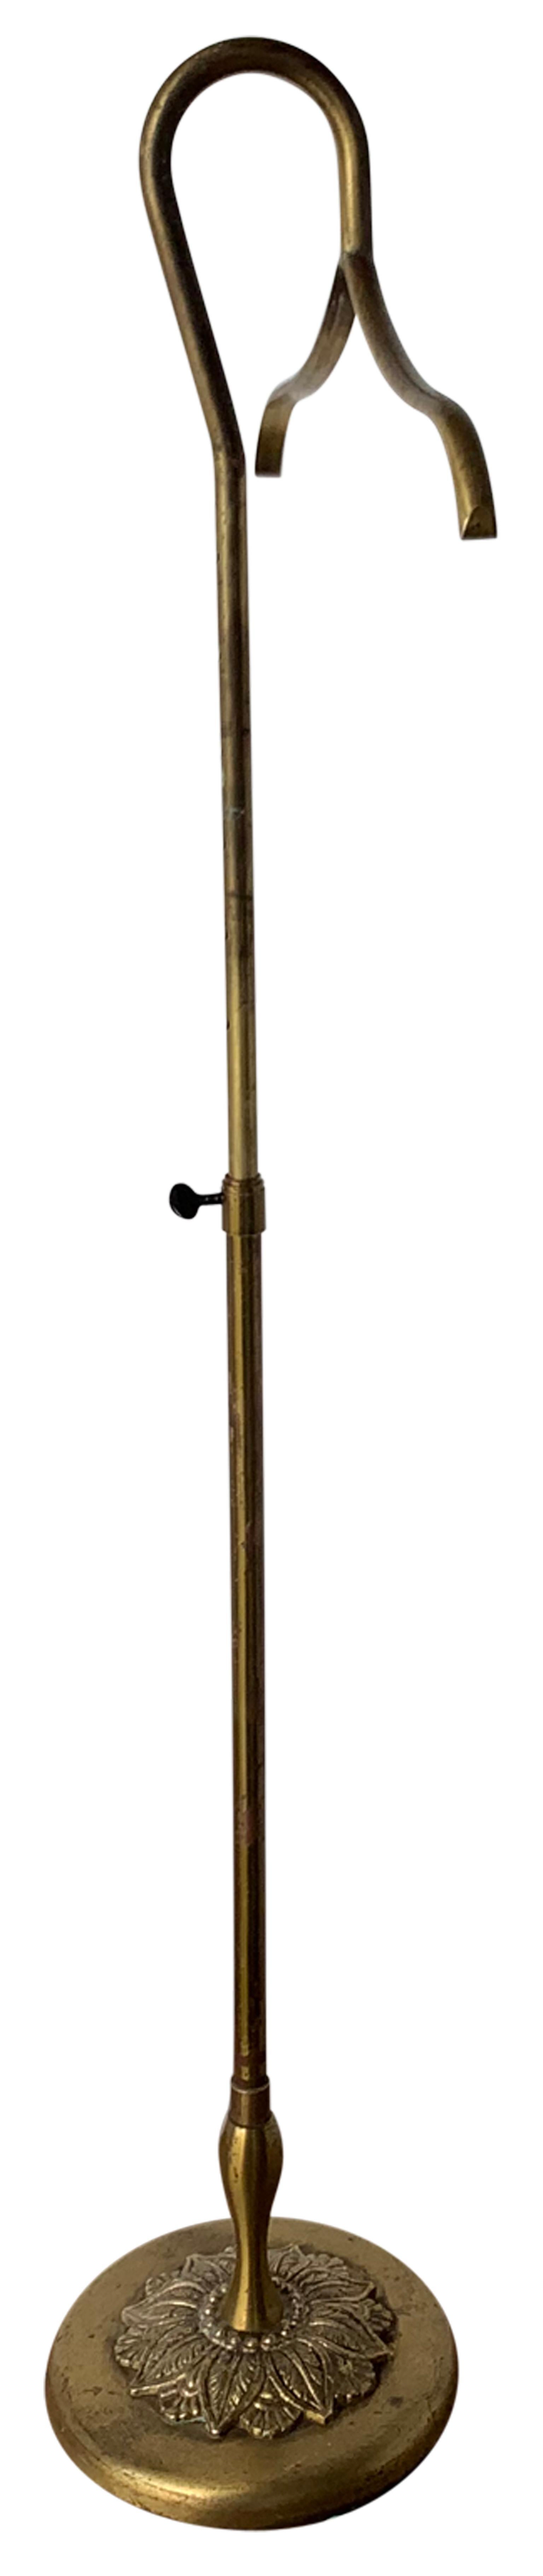 Art Deco Early French Adjustable Brass Coat Or Shirt Holder Stand